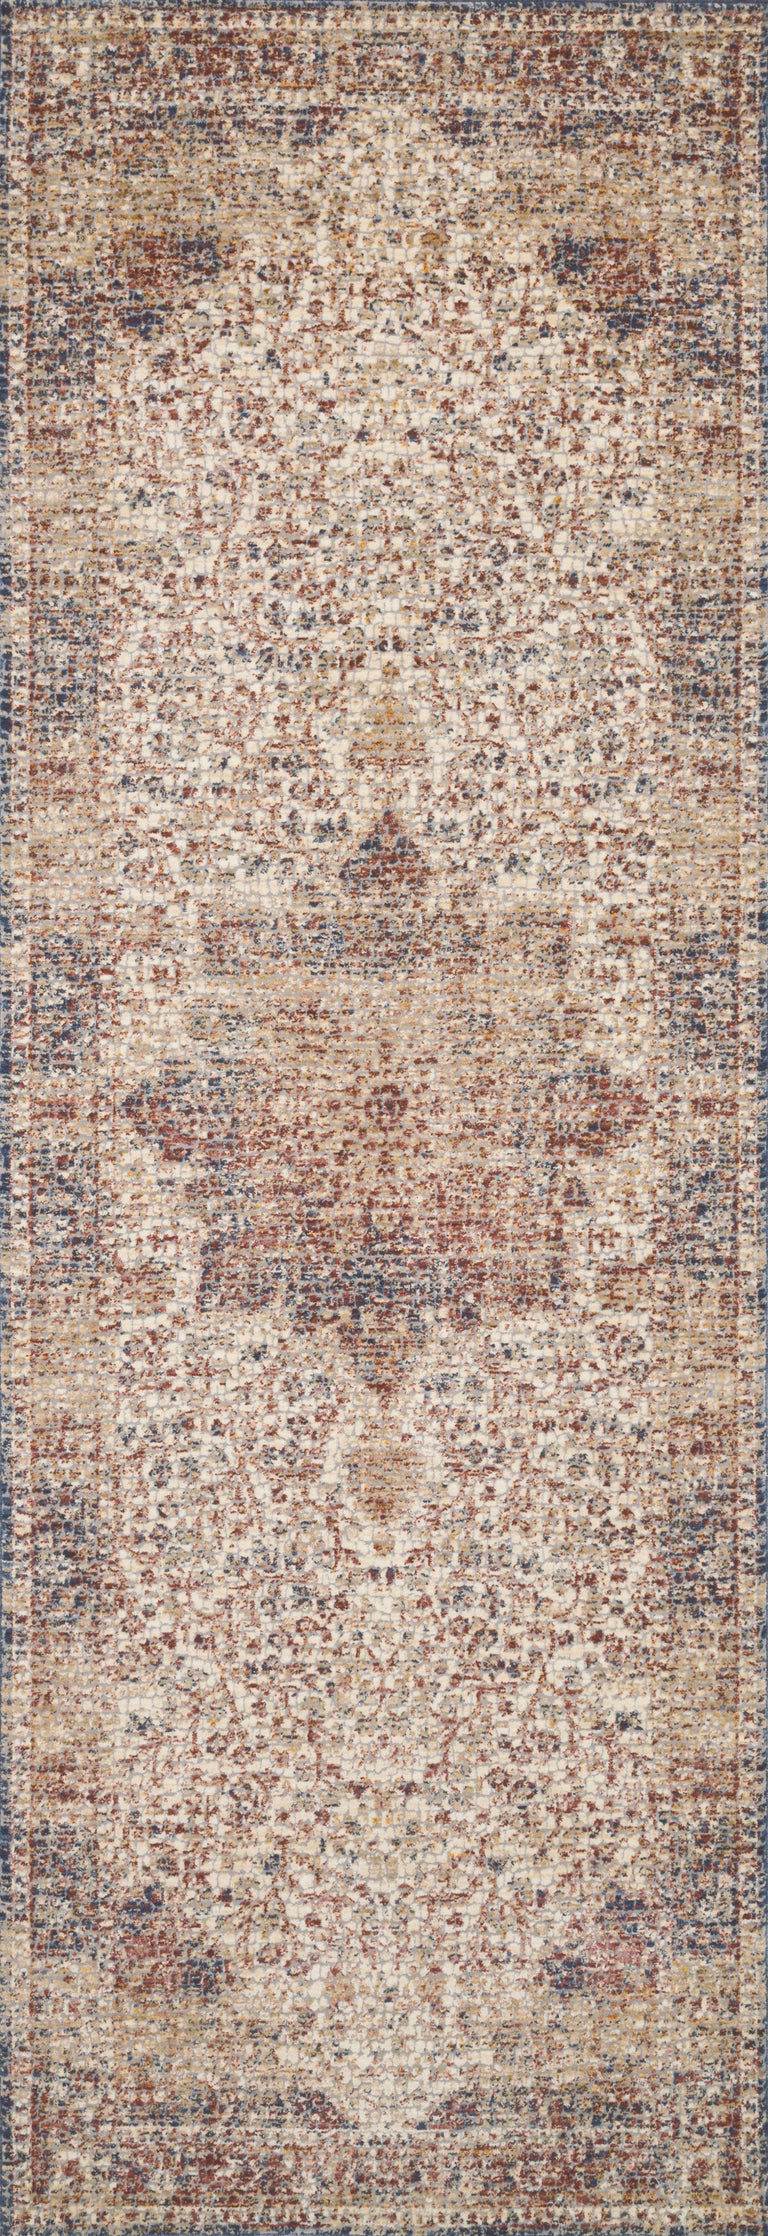 Loloi Rugs Porcia Collection Rug in Ivory, Red - 9'6" x 9'6"